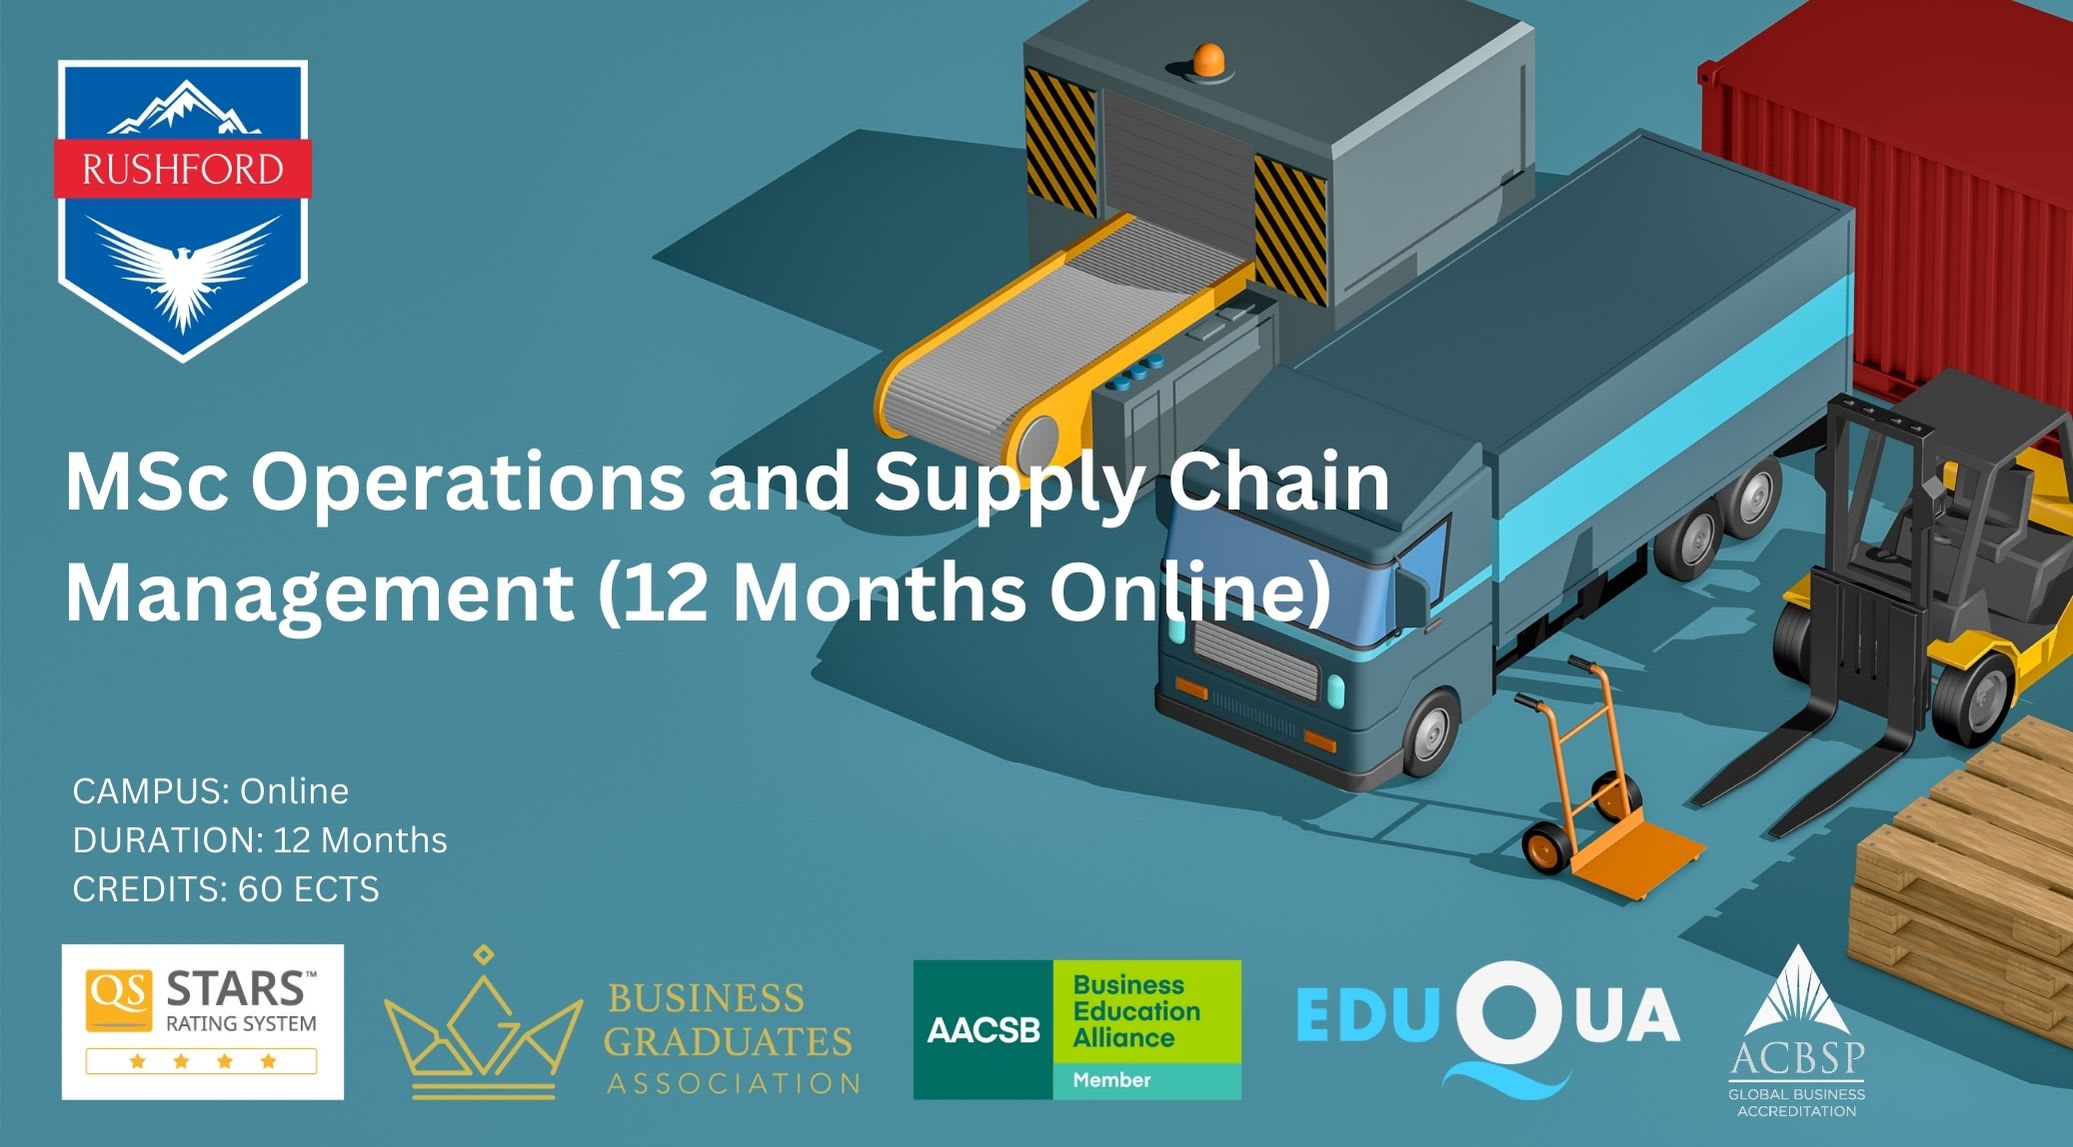 MSc Operations and Supply Chain Management (Online)